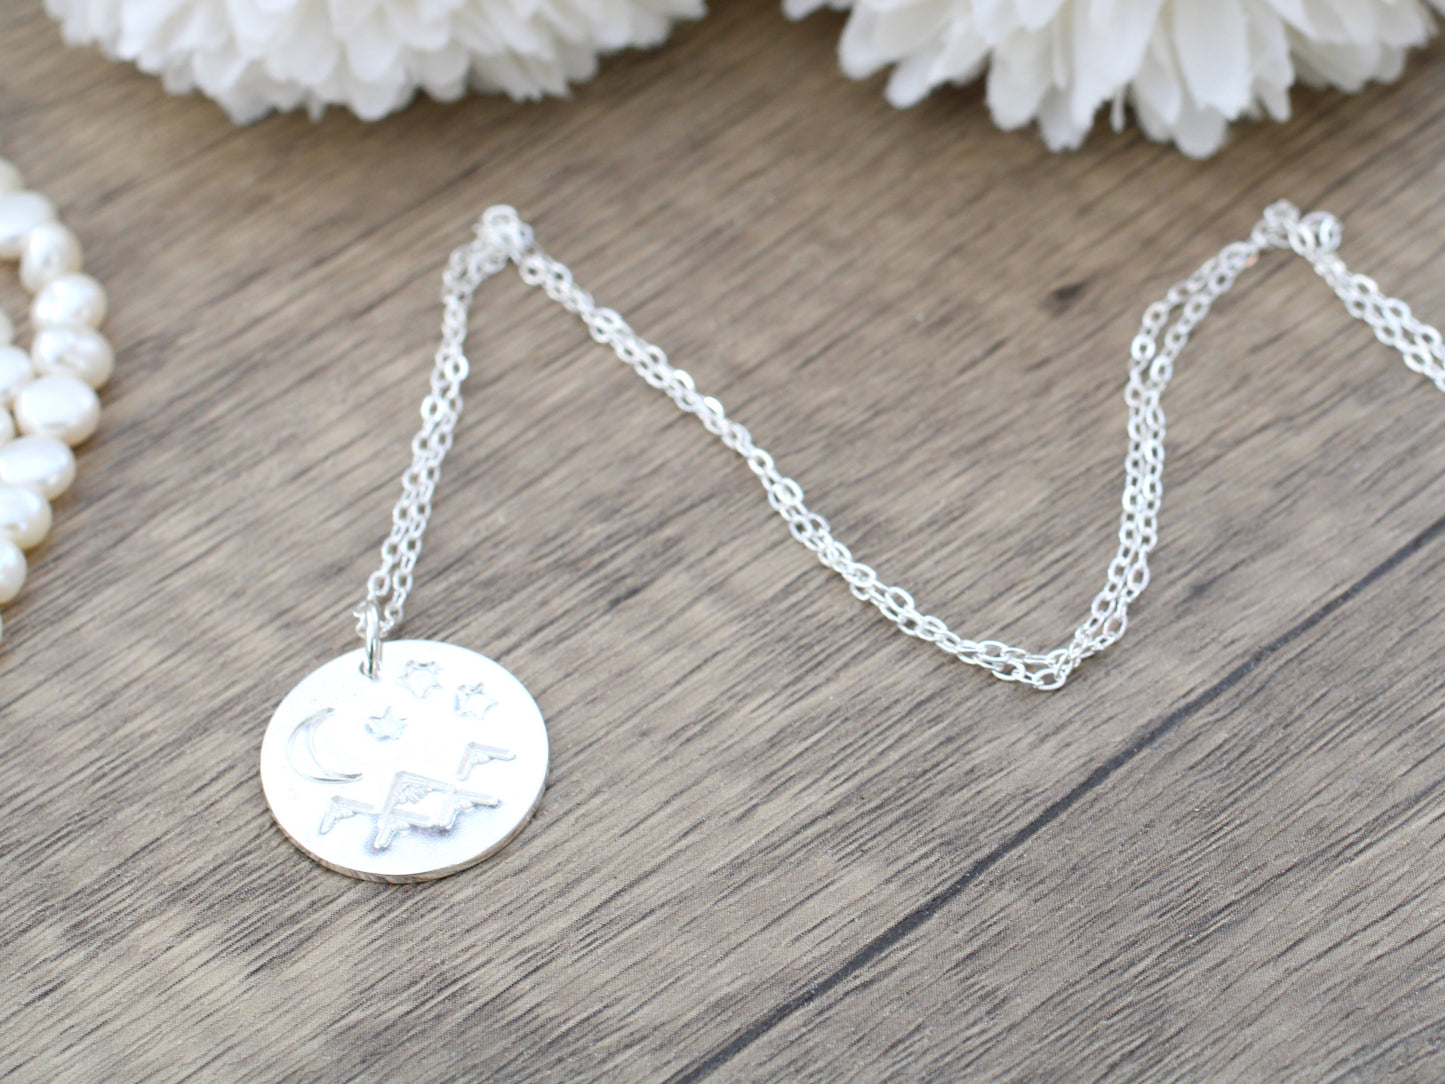 Mountain necklace in sterling silver.